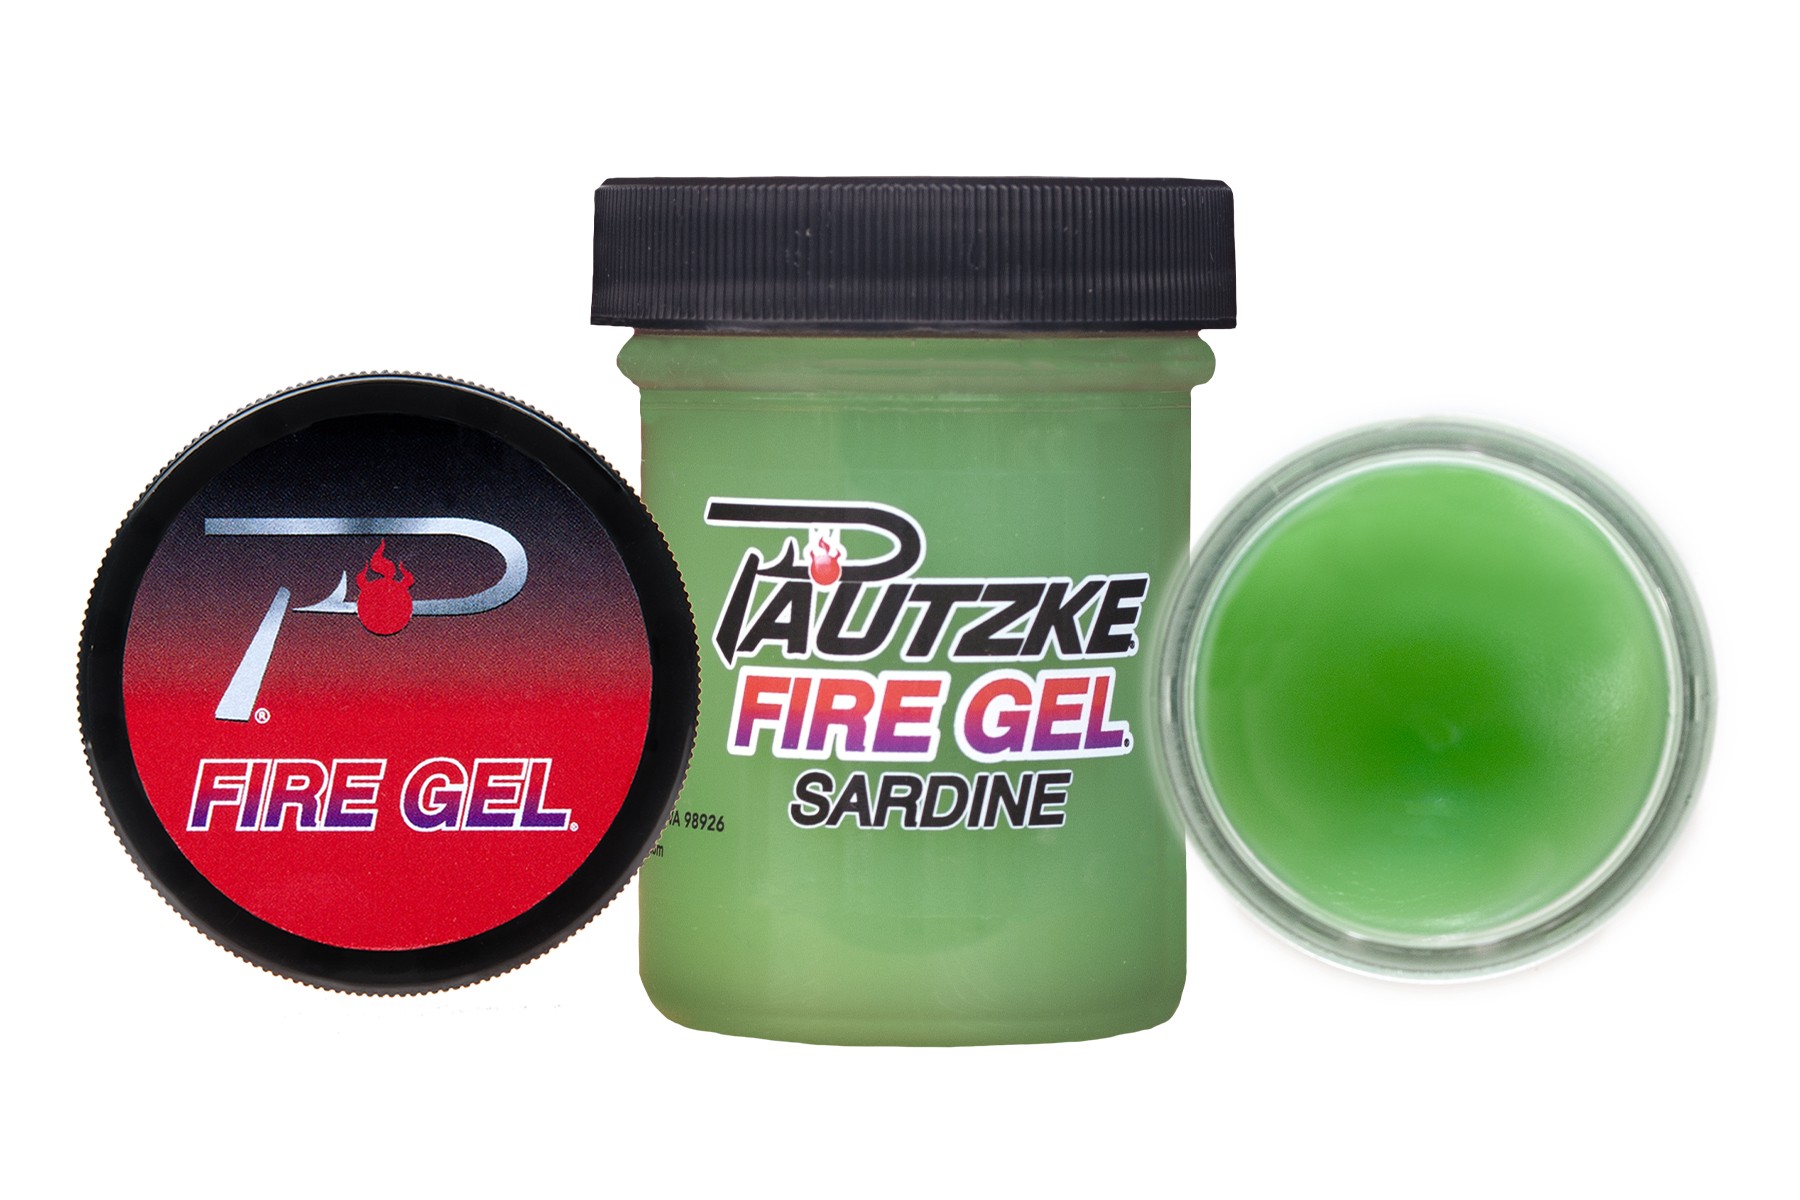 Pautzke Fishing Scent Attractant Fire Gel Bait Shad